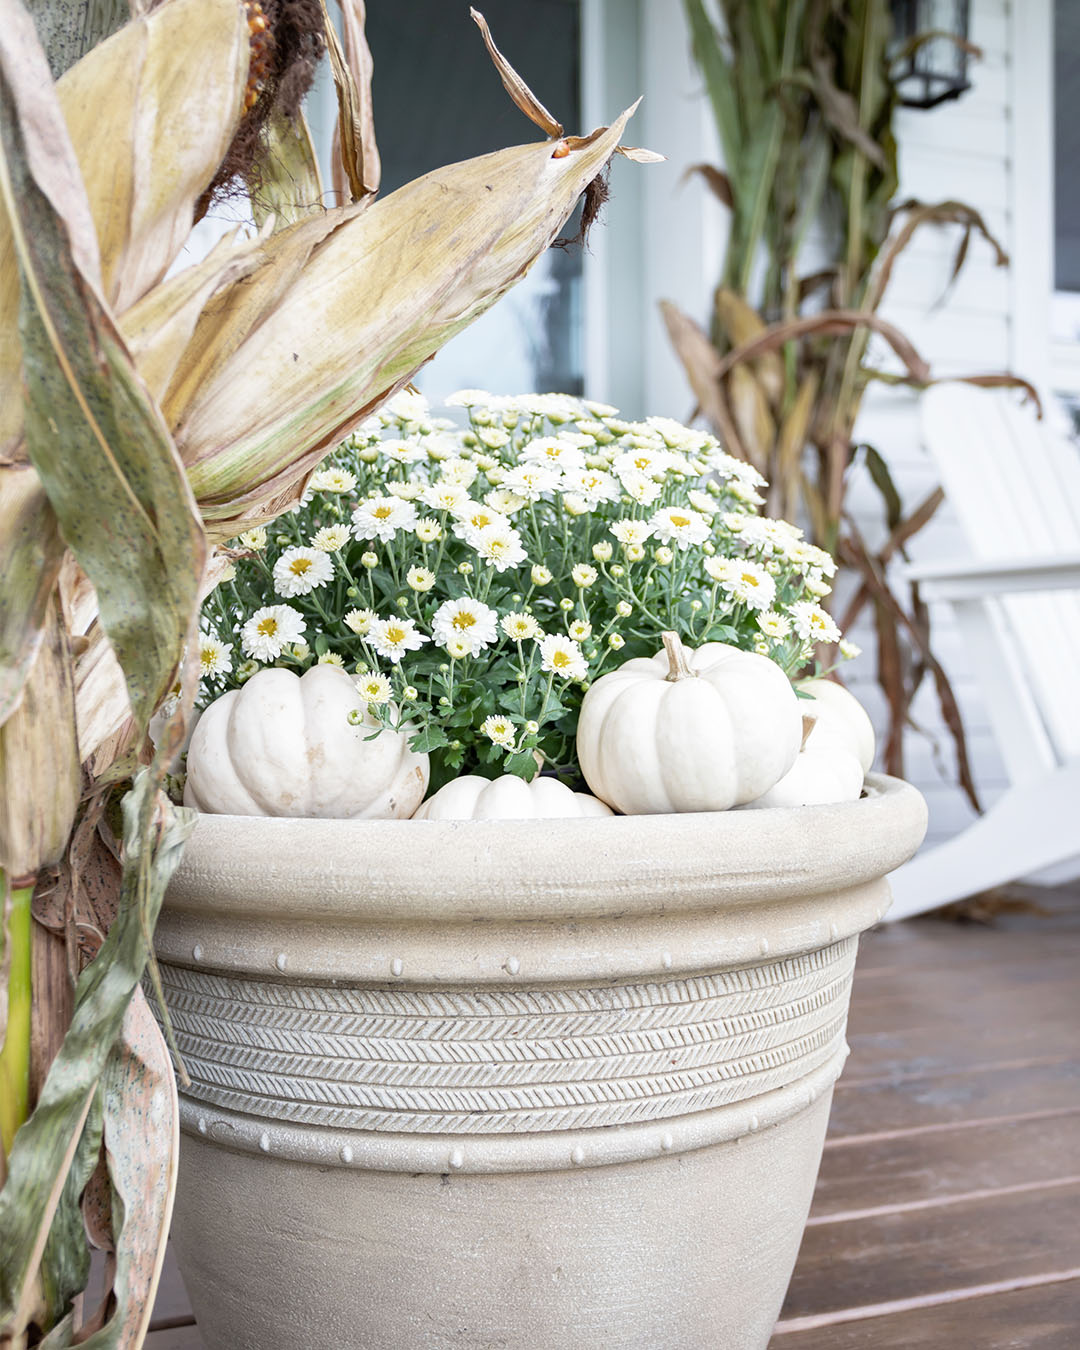 This giant fall porch planter cost me less than $15 to put together! Here's how to make this inexpensive oversized fall porch planter.